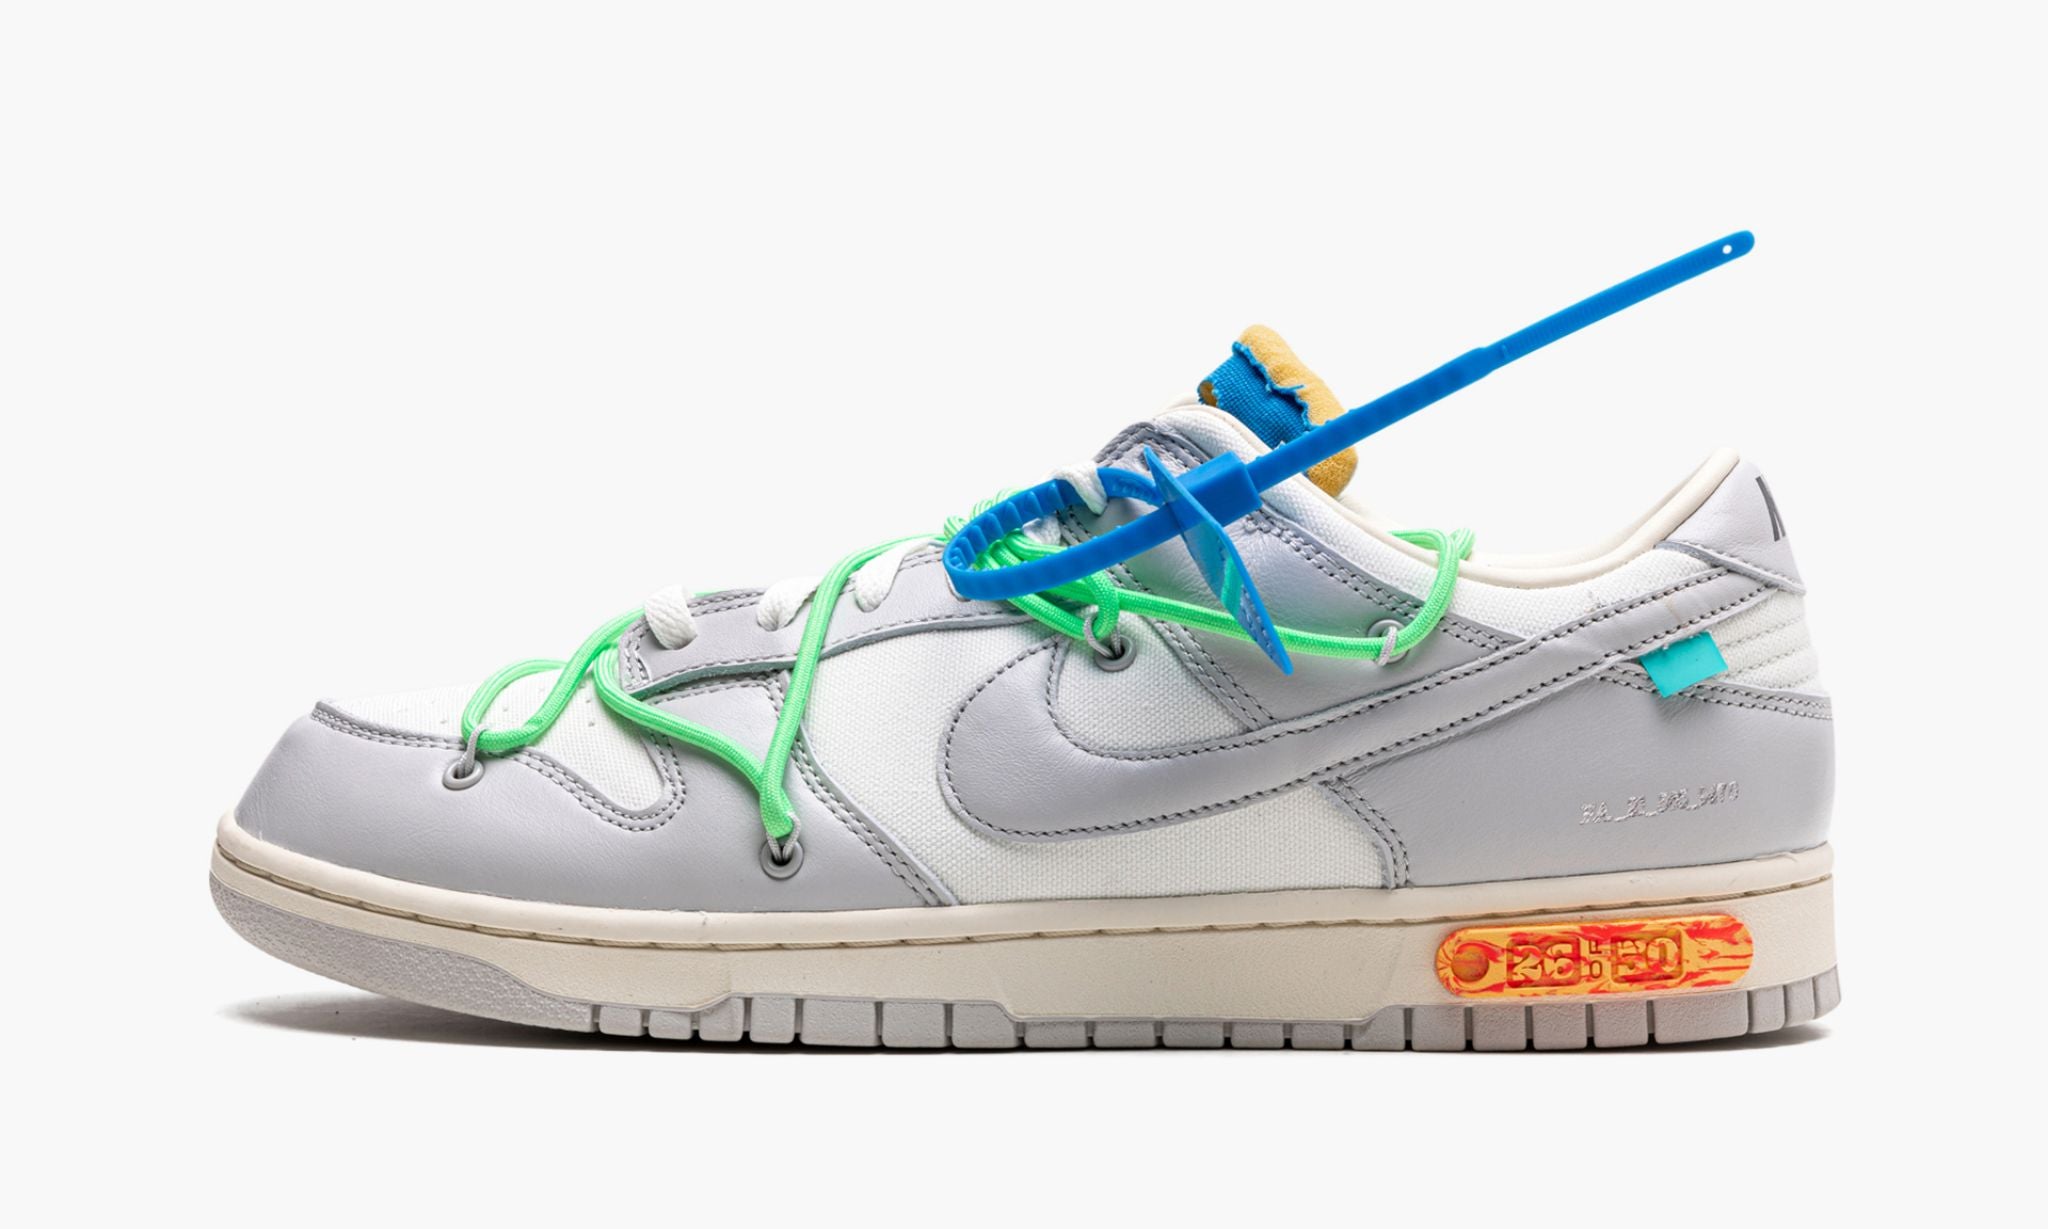 Off White x Nike Dunk Low lot 26/50